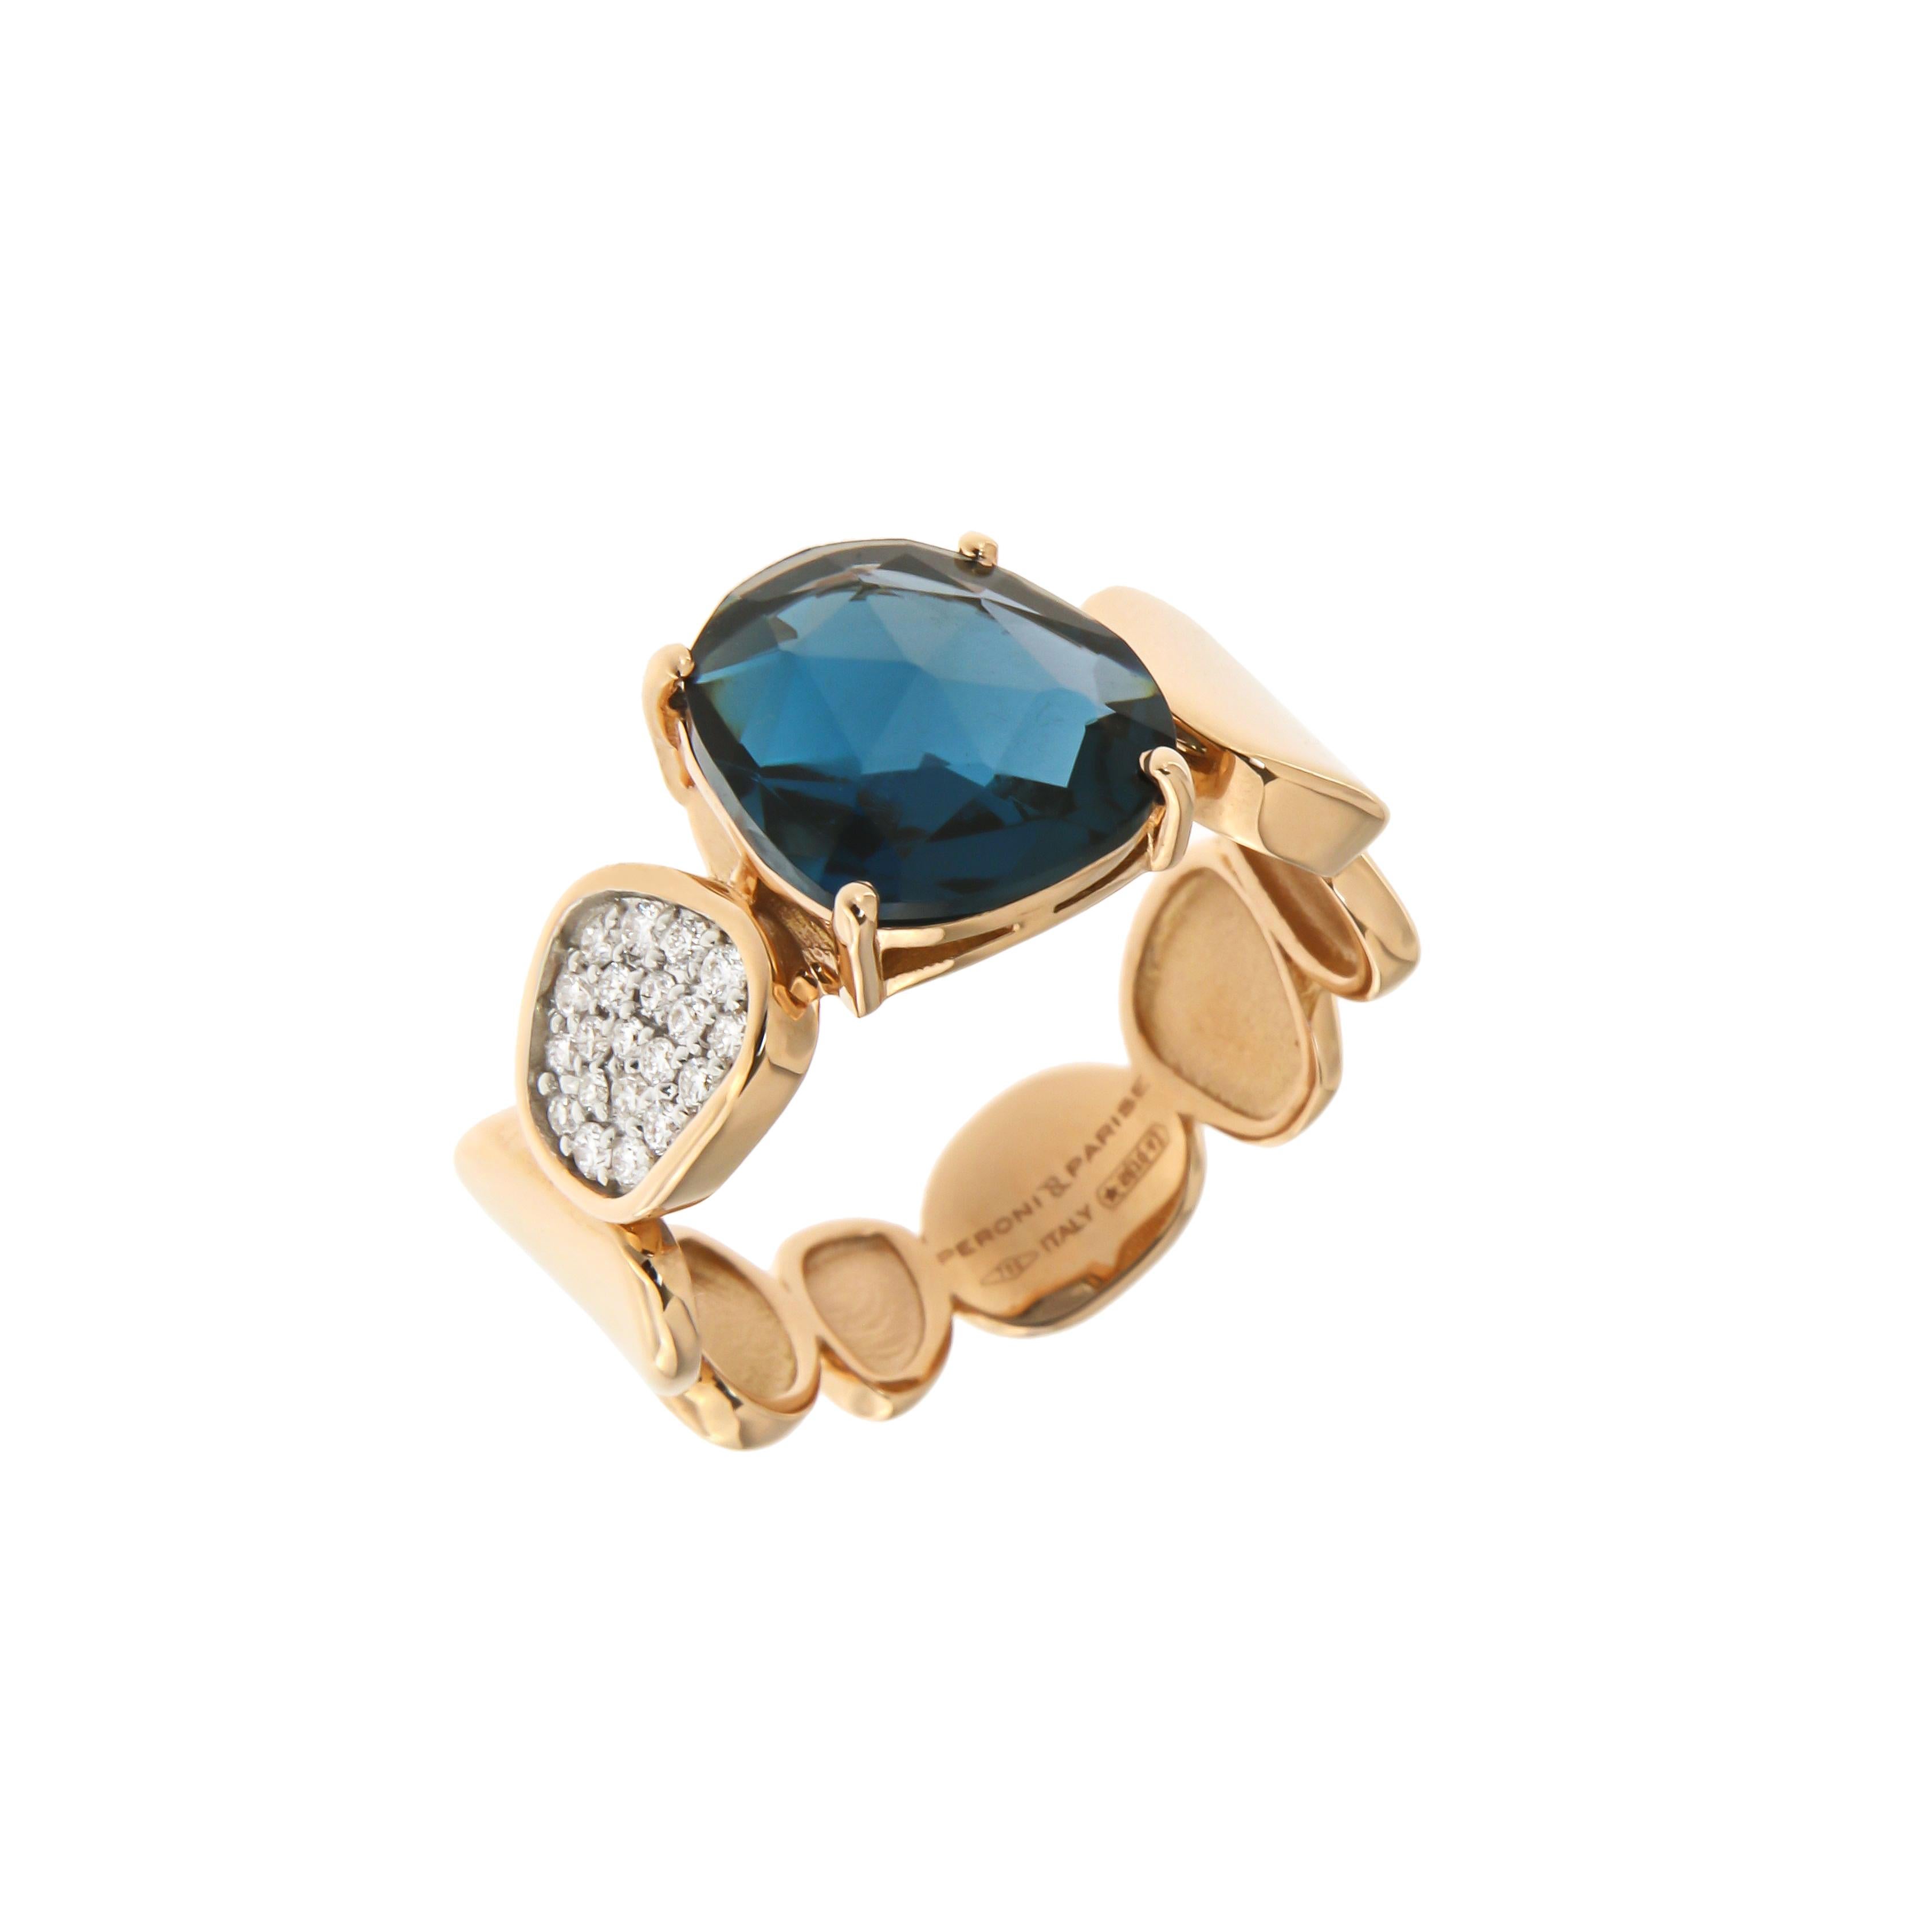 Ring Rose Gold 18 K (Same Style Bigger Model Available)
Diamond 0,13 ct
London Blue Topaz 

Weight 5,30 grams
Size 14

With a heritage of ancient fine Swiss jewelry traditions, NATKINA is a Geneva based jewellery brand, which creates modern